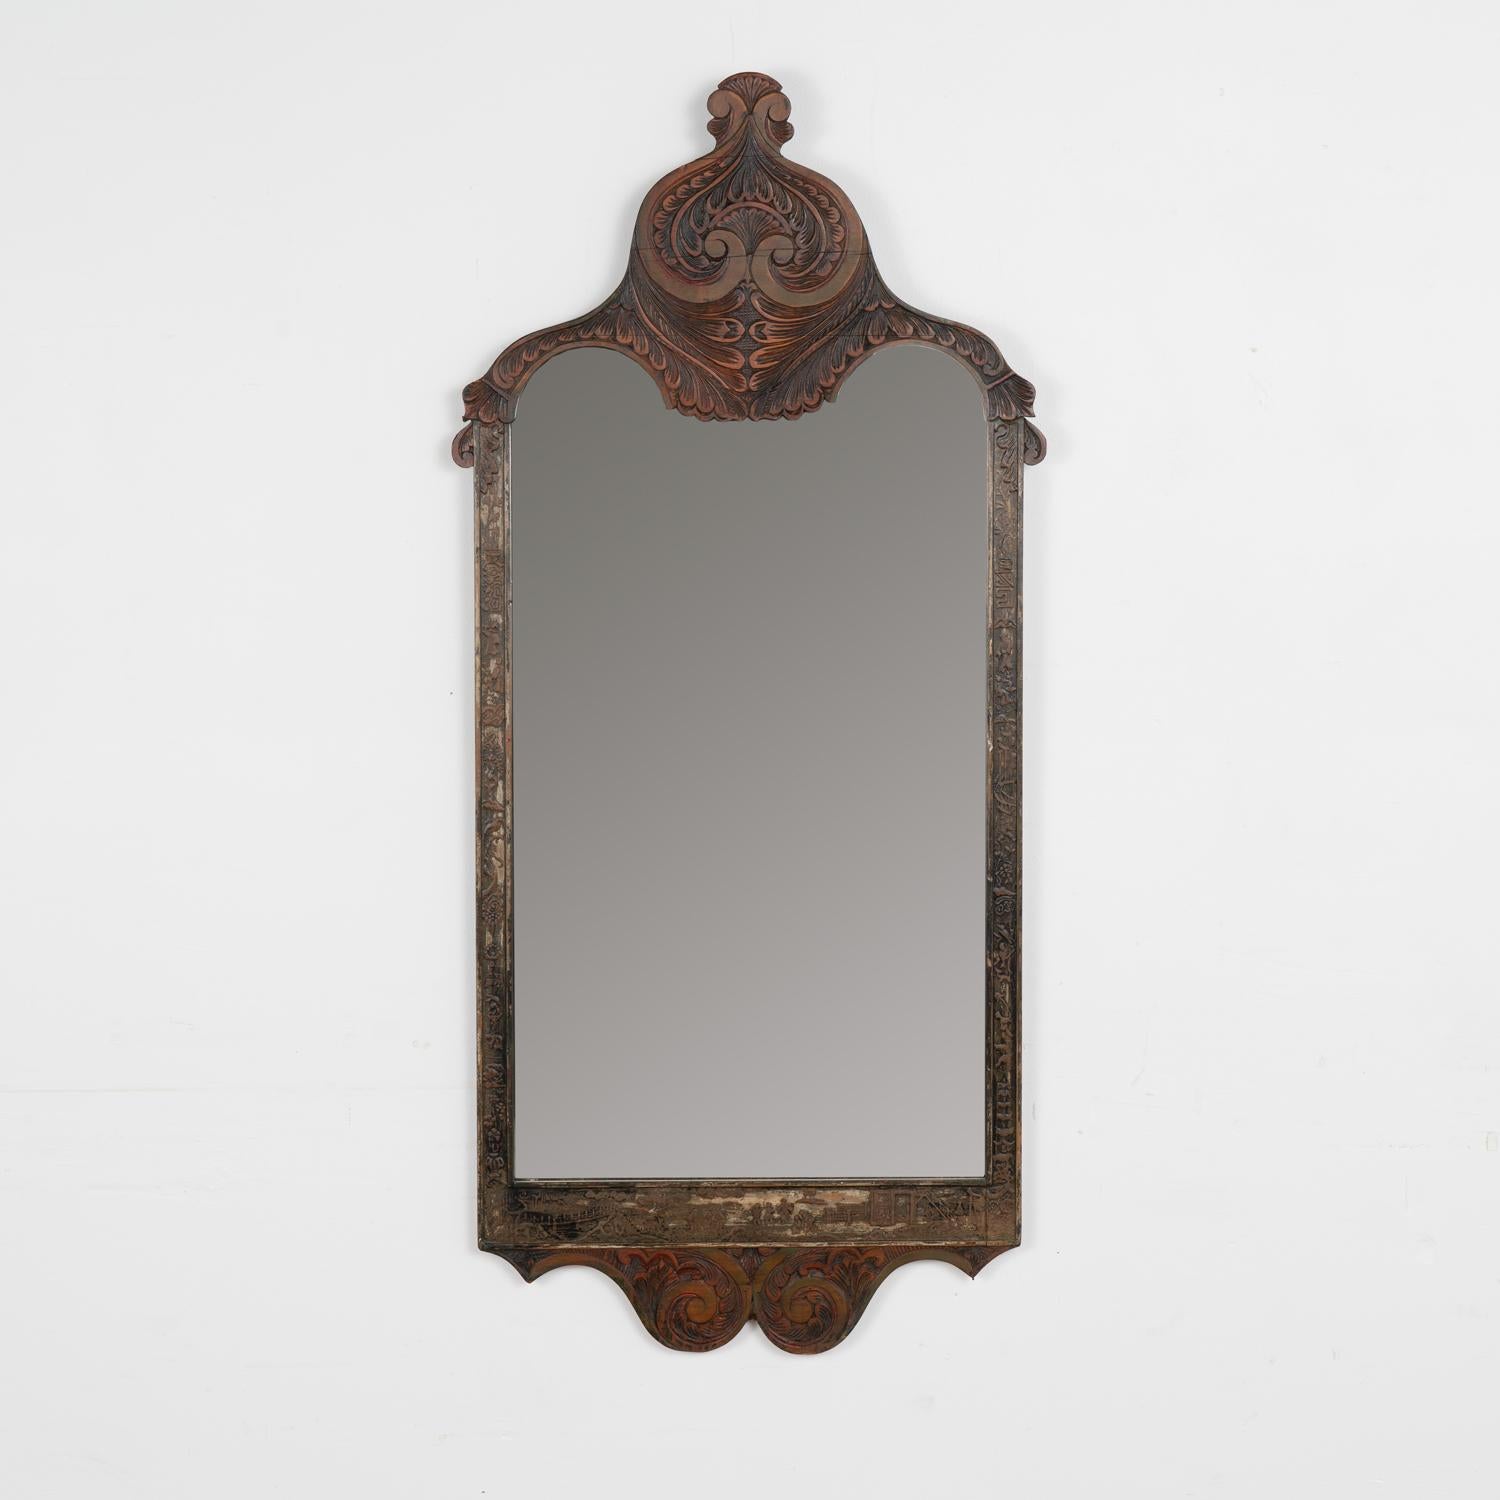 The attractive carving found in the frame of this mirror includes dramatic flourishes on top, balanced at the base while narrow sides contain figures, birds and more. 
Notice the original brown/black painted finish shows residual touches of red and